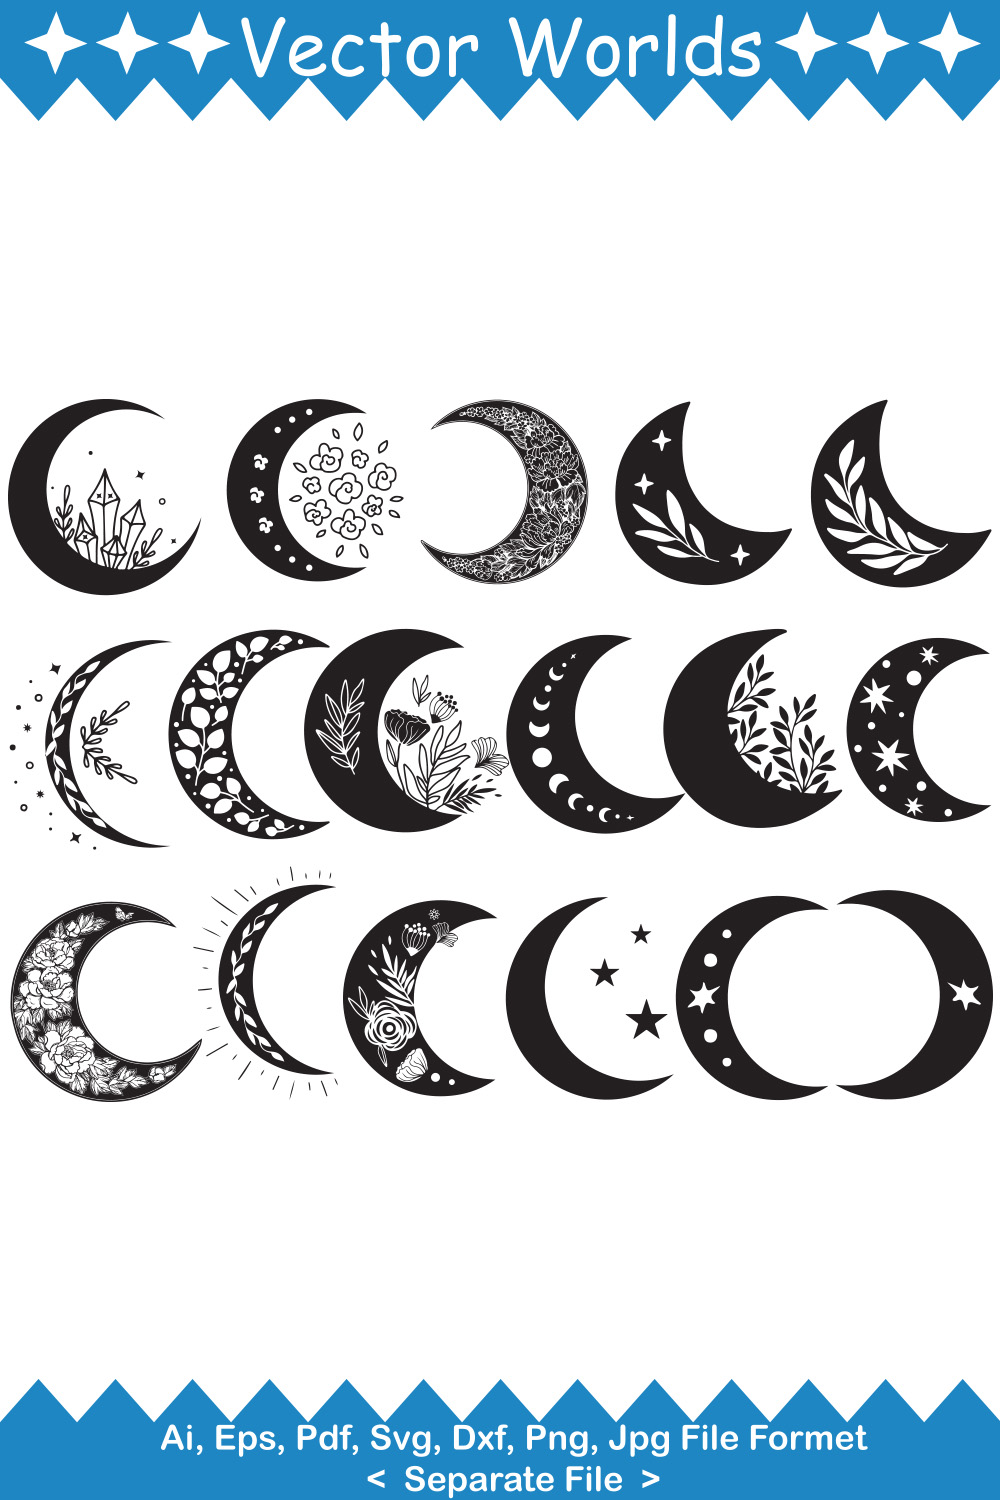 Bundle of vector irresistible images of the boho moon silhouette.